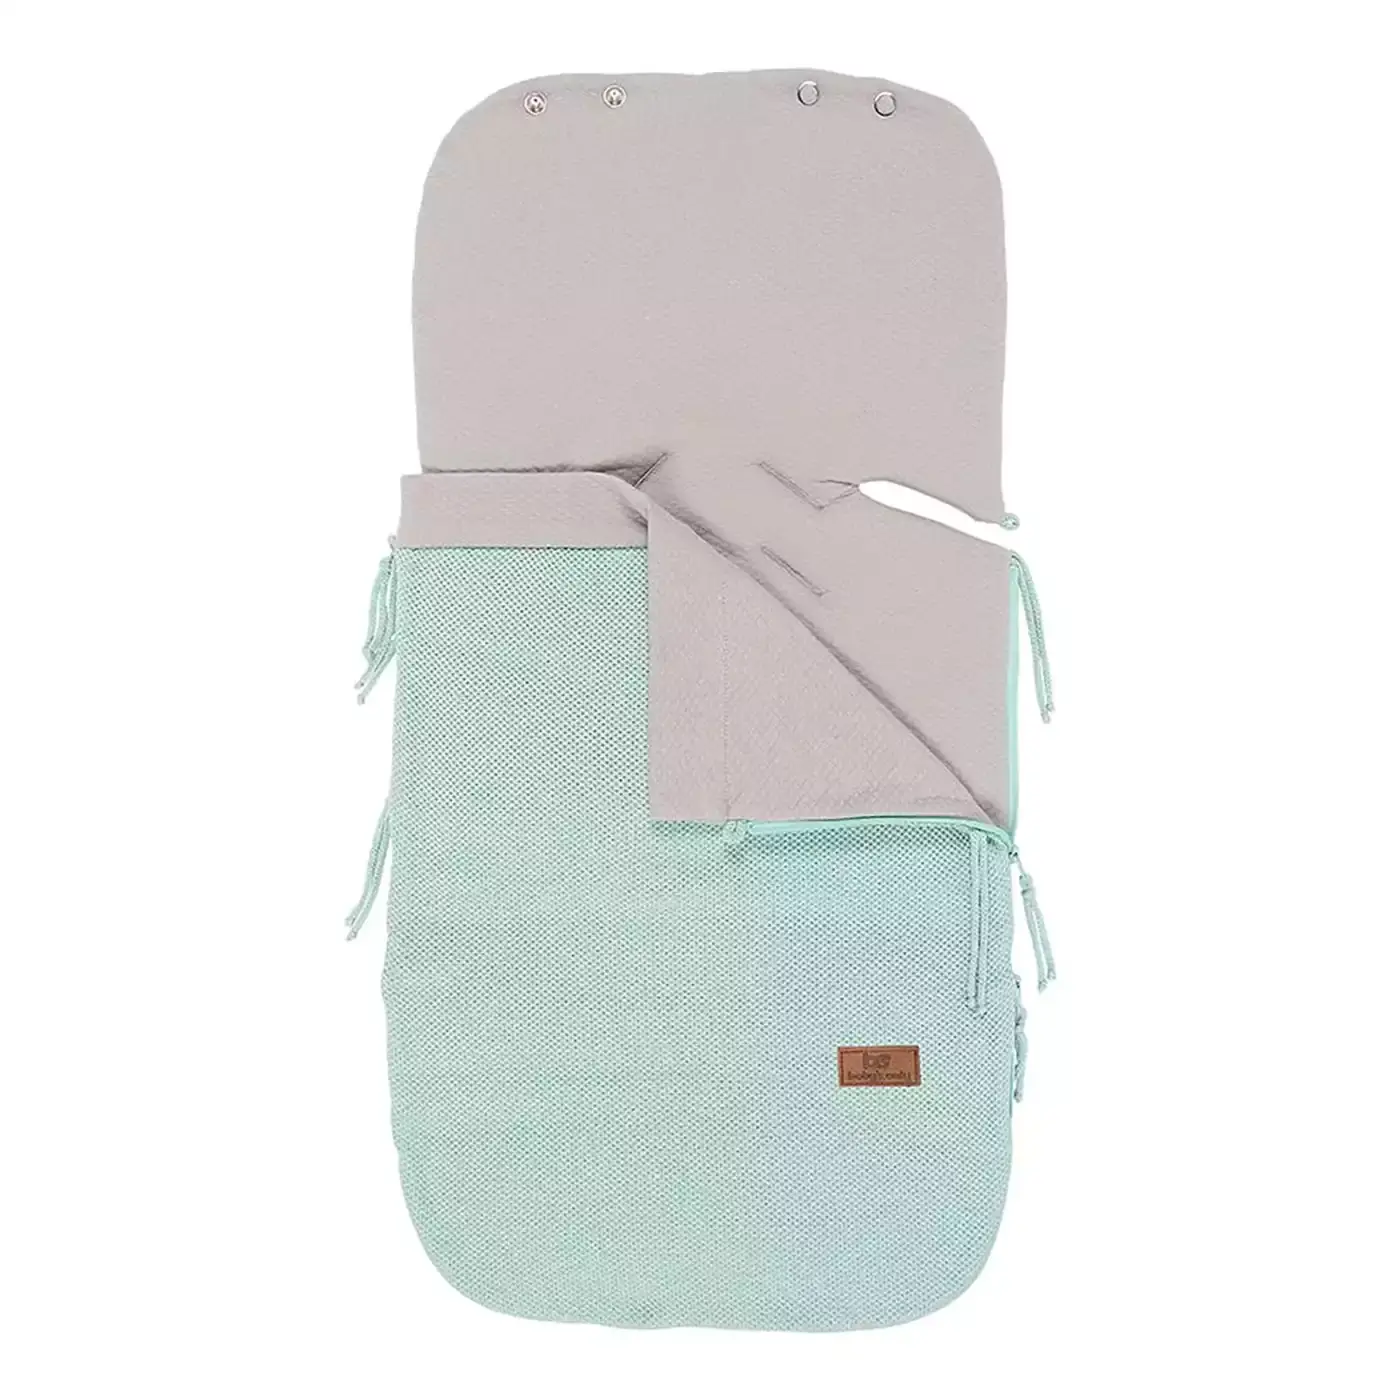 Sommer Fußsack Classic Mint baby's only Grün 2000571225107 1